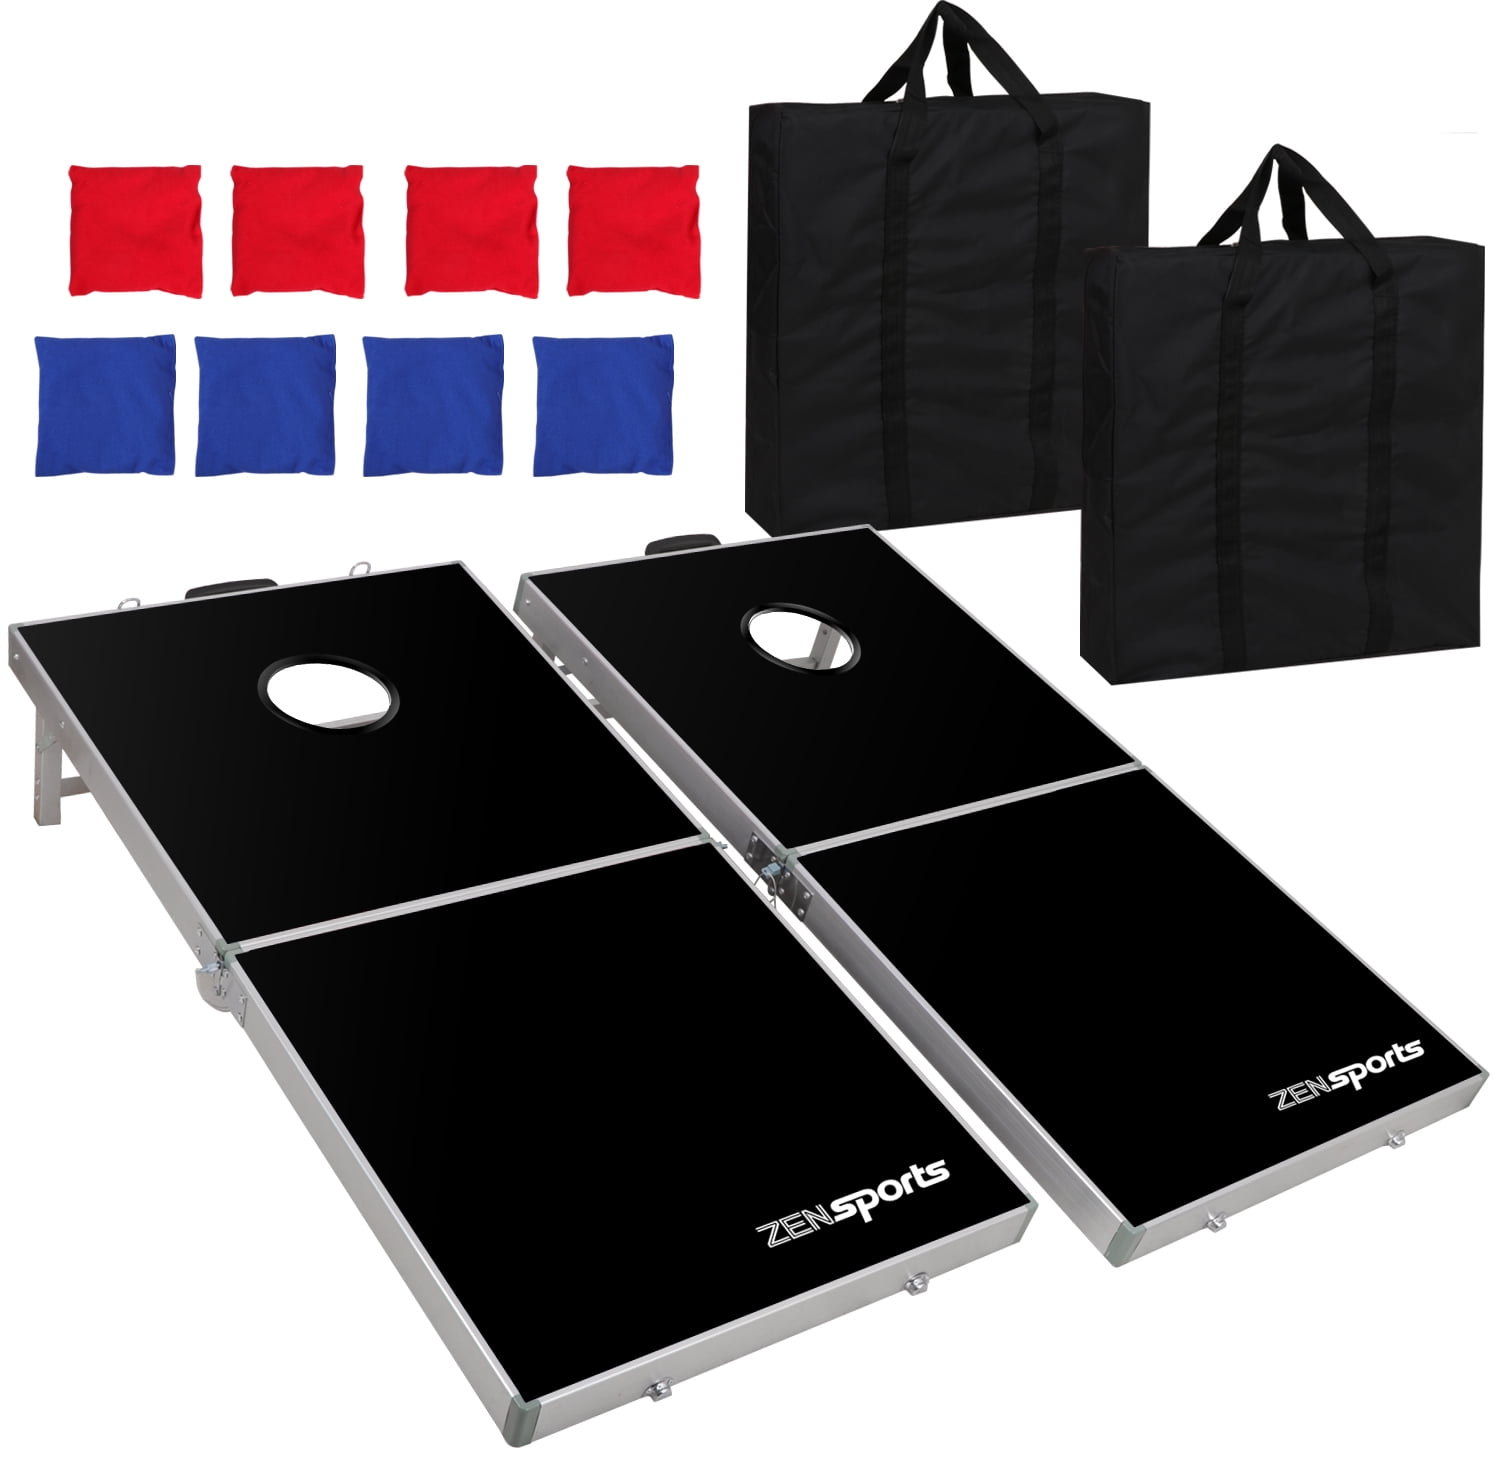 ZENY Portable 3 x 2 Cornhole Game Set Superior Collapsible Aluminum Alloy Frame MDF Cornhole Board w// 8 Bean Bags and Carrying Case for Tailgate Party Backyard BBQ Game